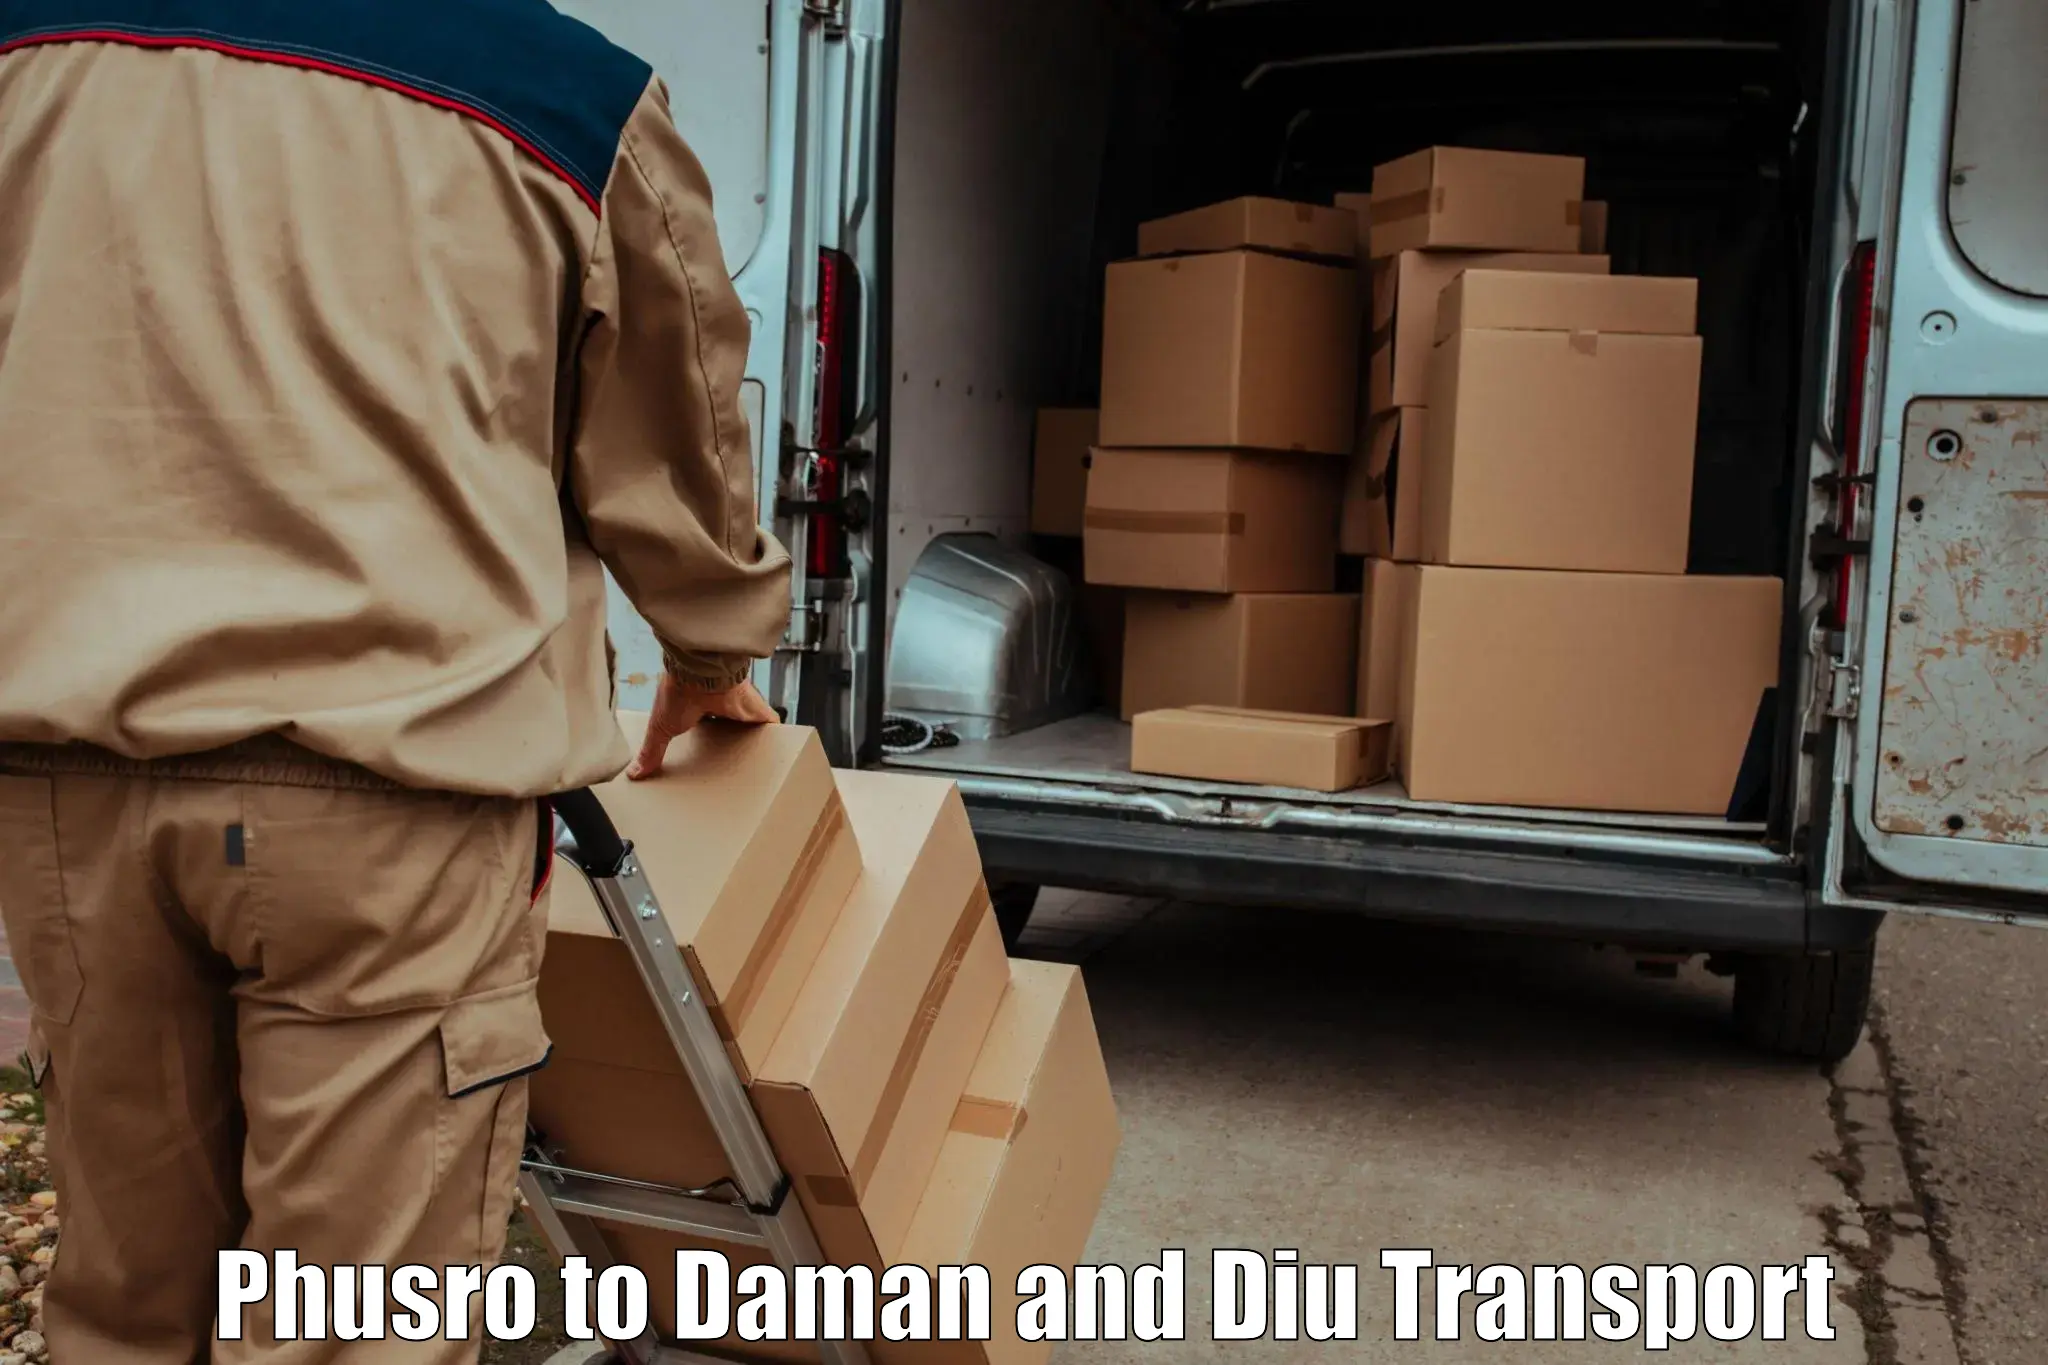 Commercial transport service Phusro to Daman and Diu